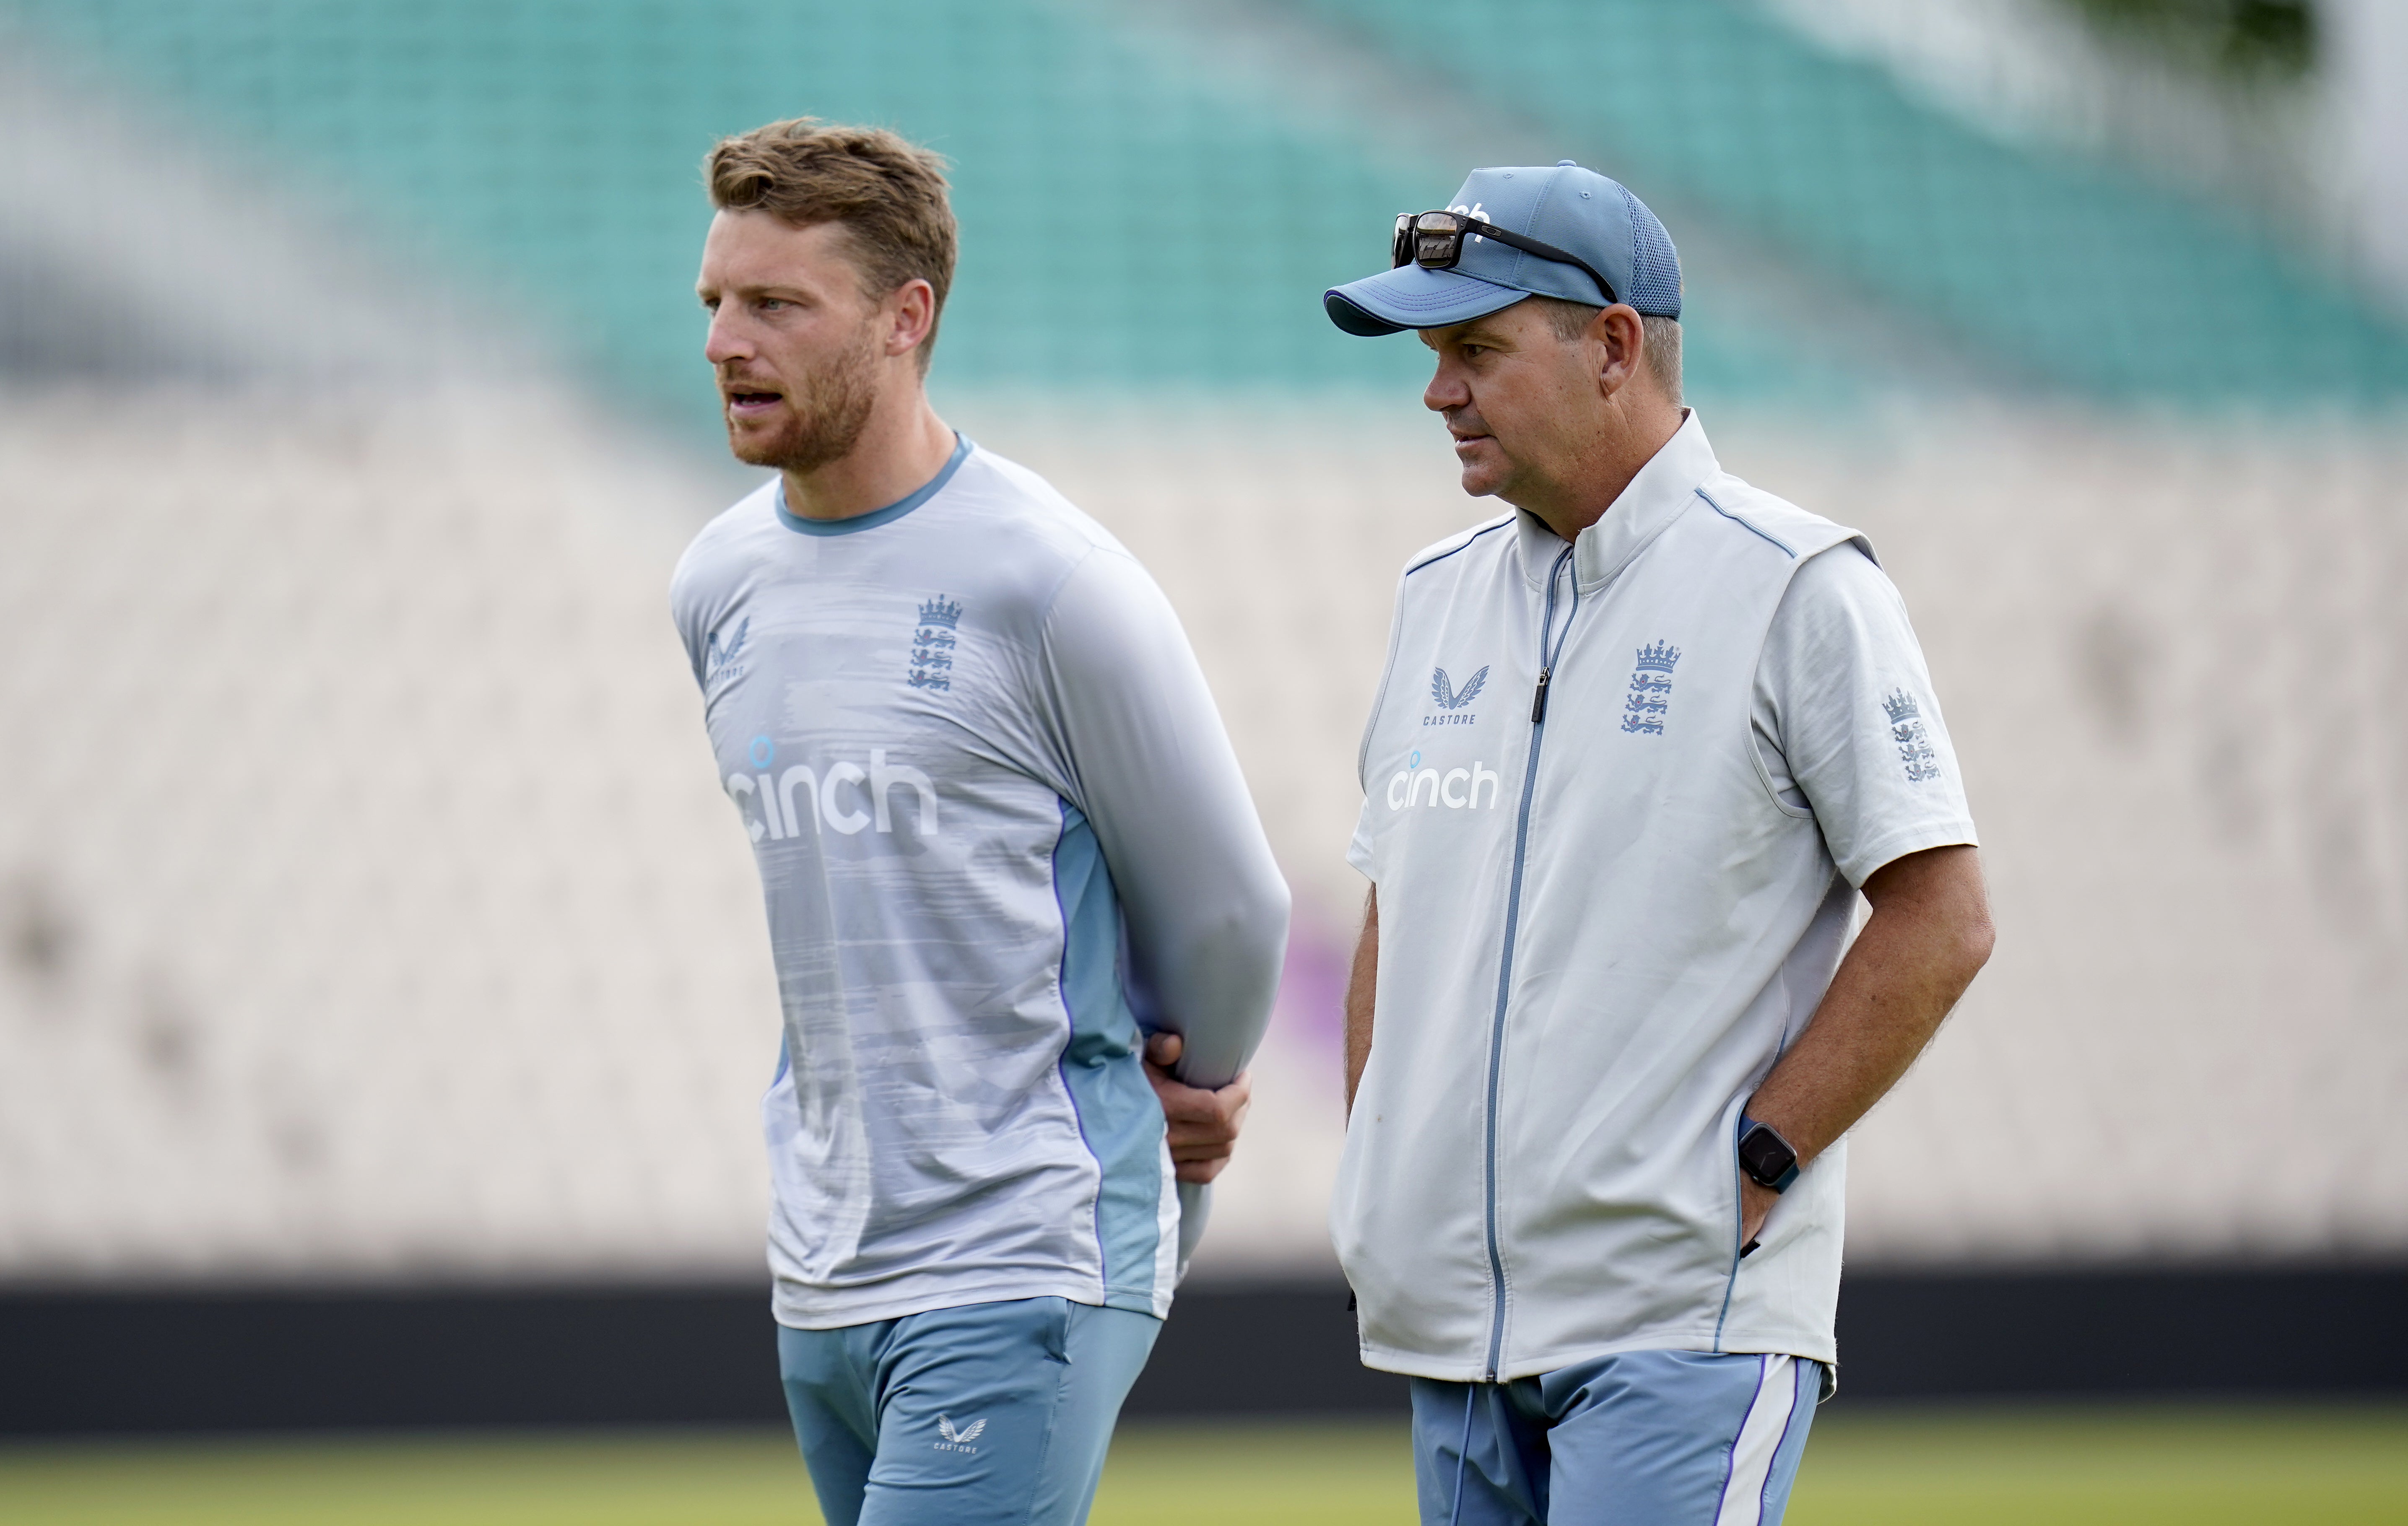 pa ready, james anderson, england, rob key, ben foakes, india, lord, matthew mott, west indies, english, jos buttler, lancashire, jonny bairstow, sri lanka, somerset, jack leach, shoaib bashir, surrey, brendon mccullum, australia, james anderson to stay with england in new role as fast bowling mentor